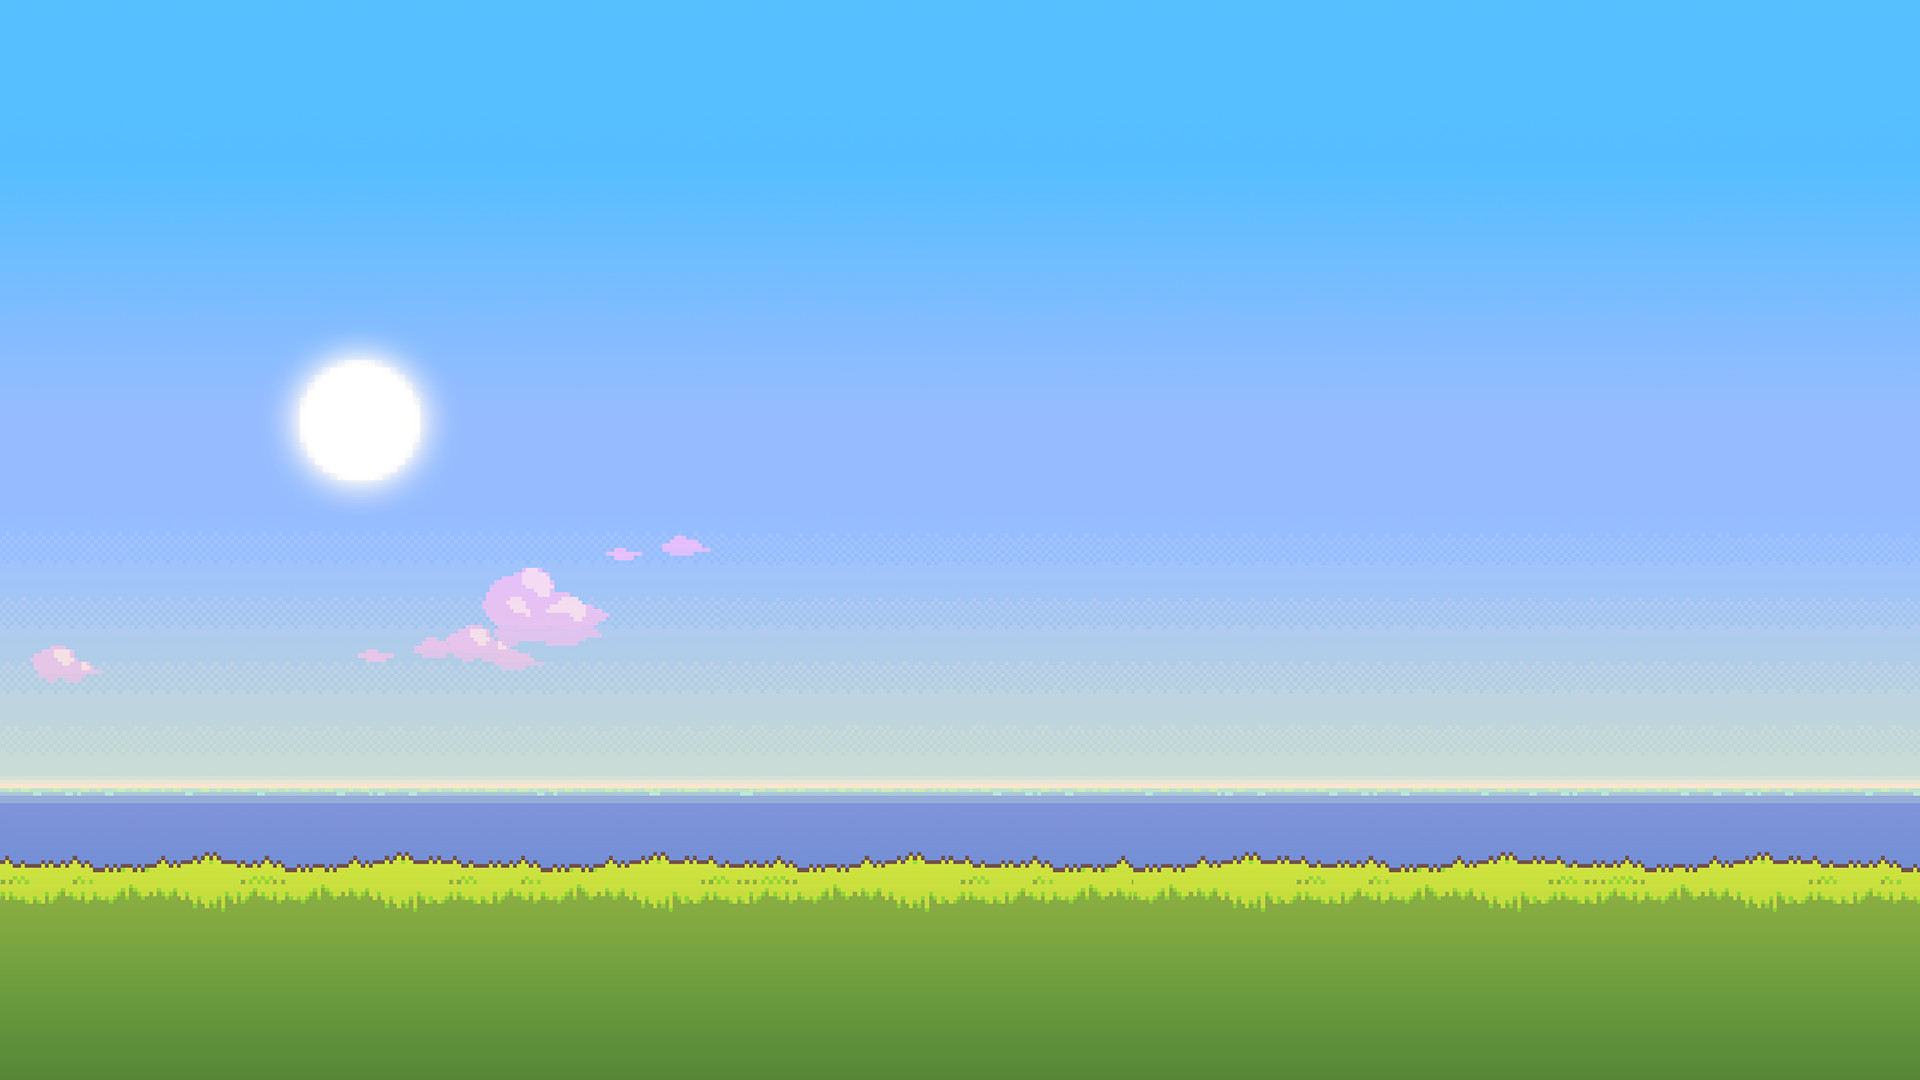 1920x1080 UPDATE: New version of the '8Bit Day' Wallpaper Set. Pixel wallpaper  changes based on time of day!